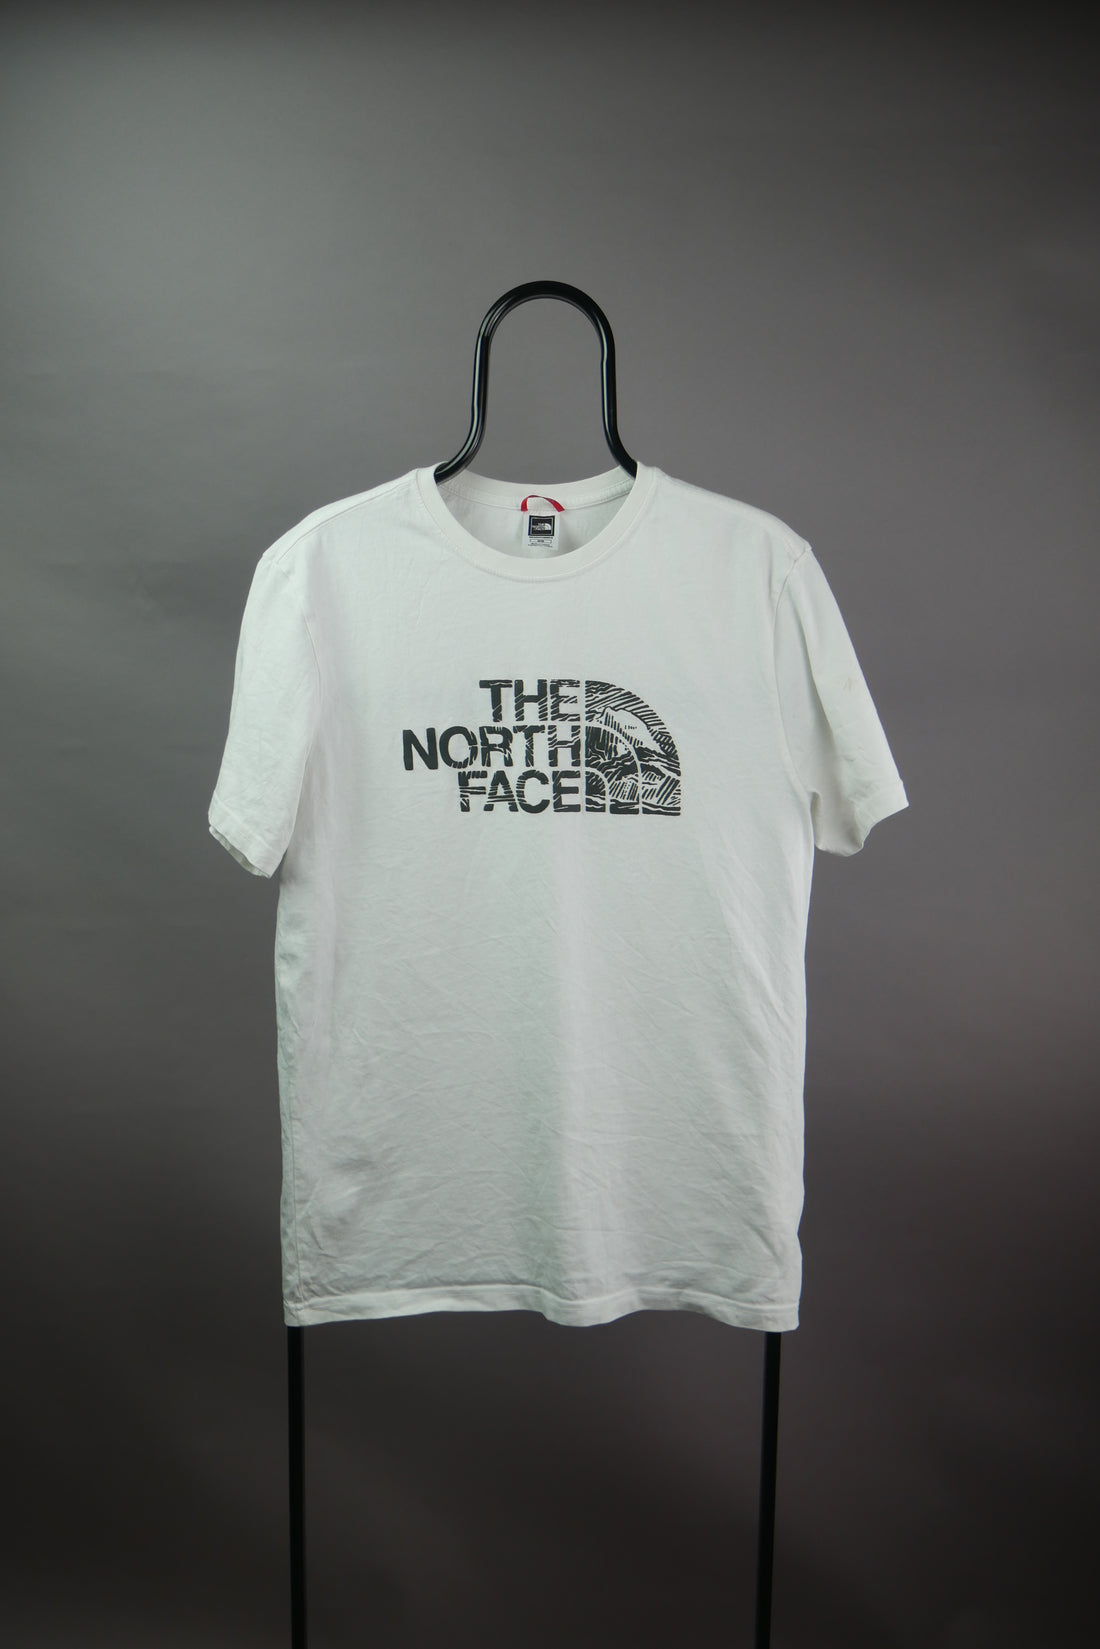 The North Face T-shirt (M)